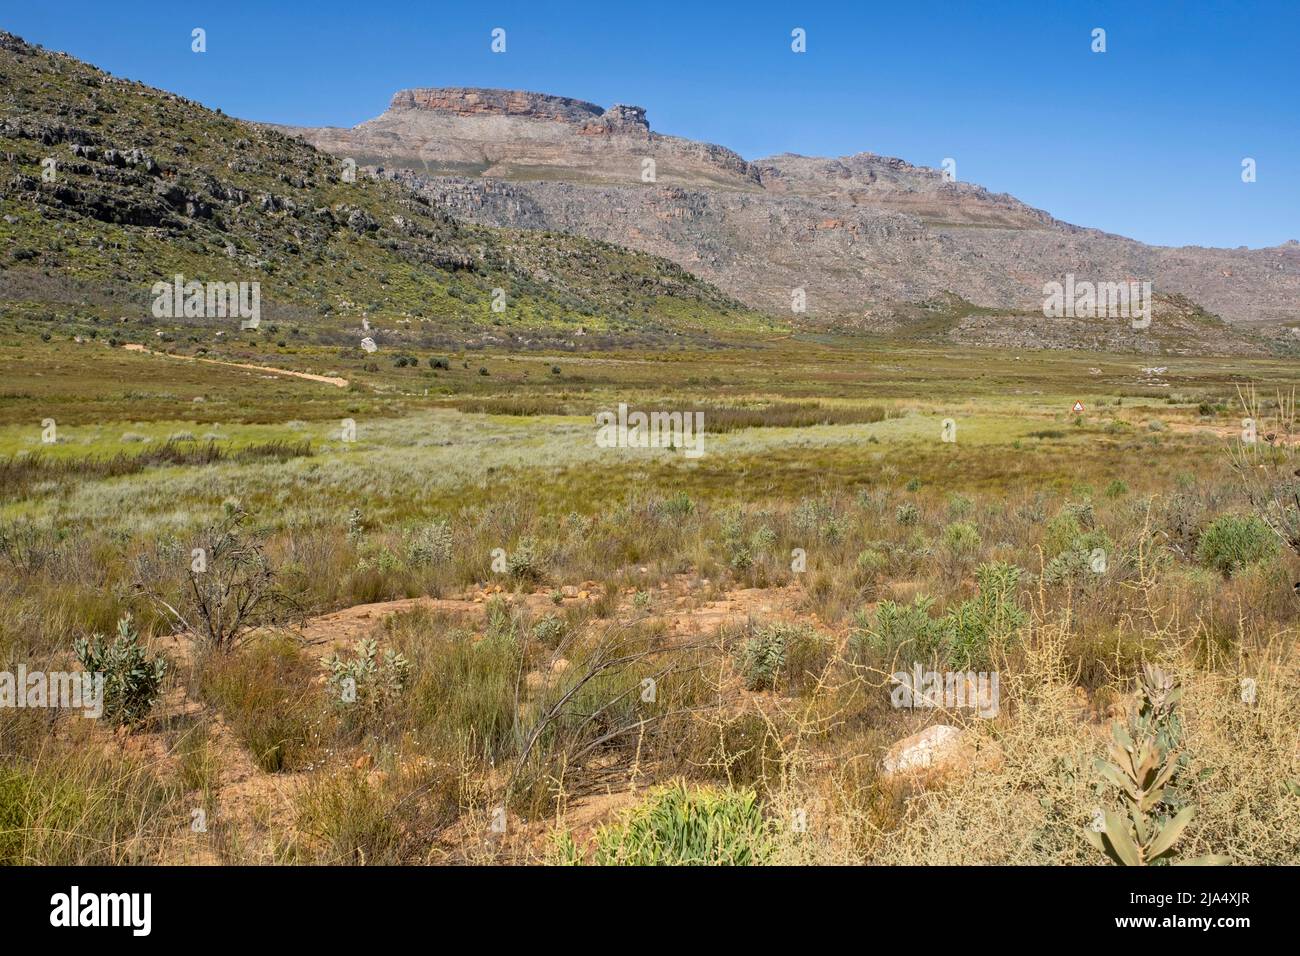 Cederberg mountains near Clanwilliam, Western Cape Province, South Africa Stock Photo